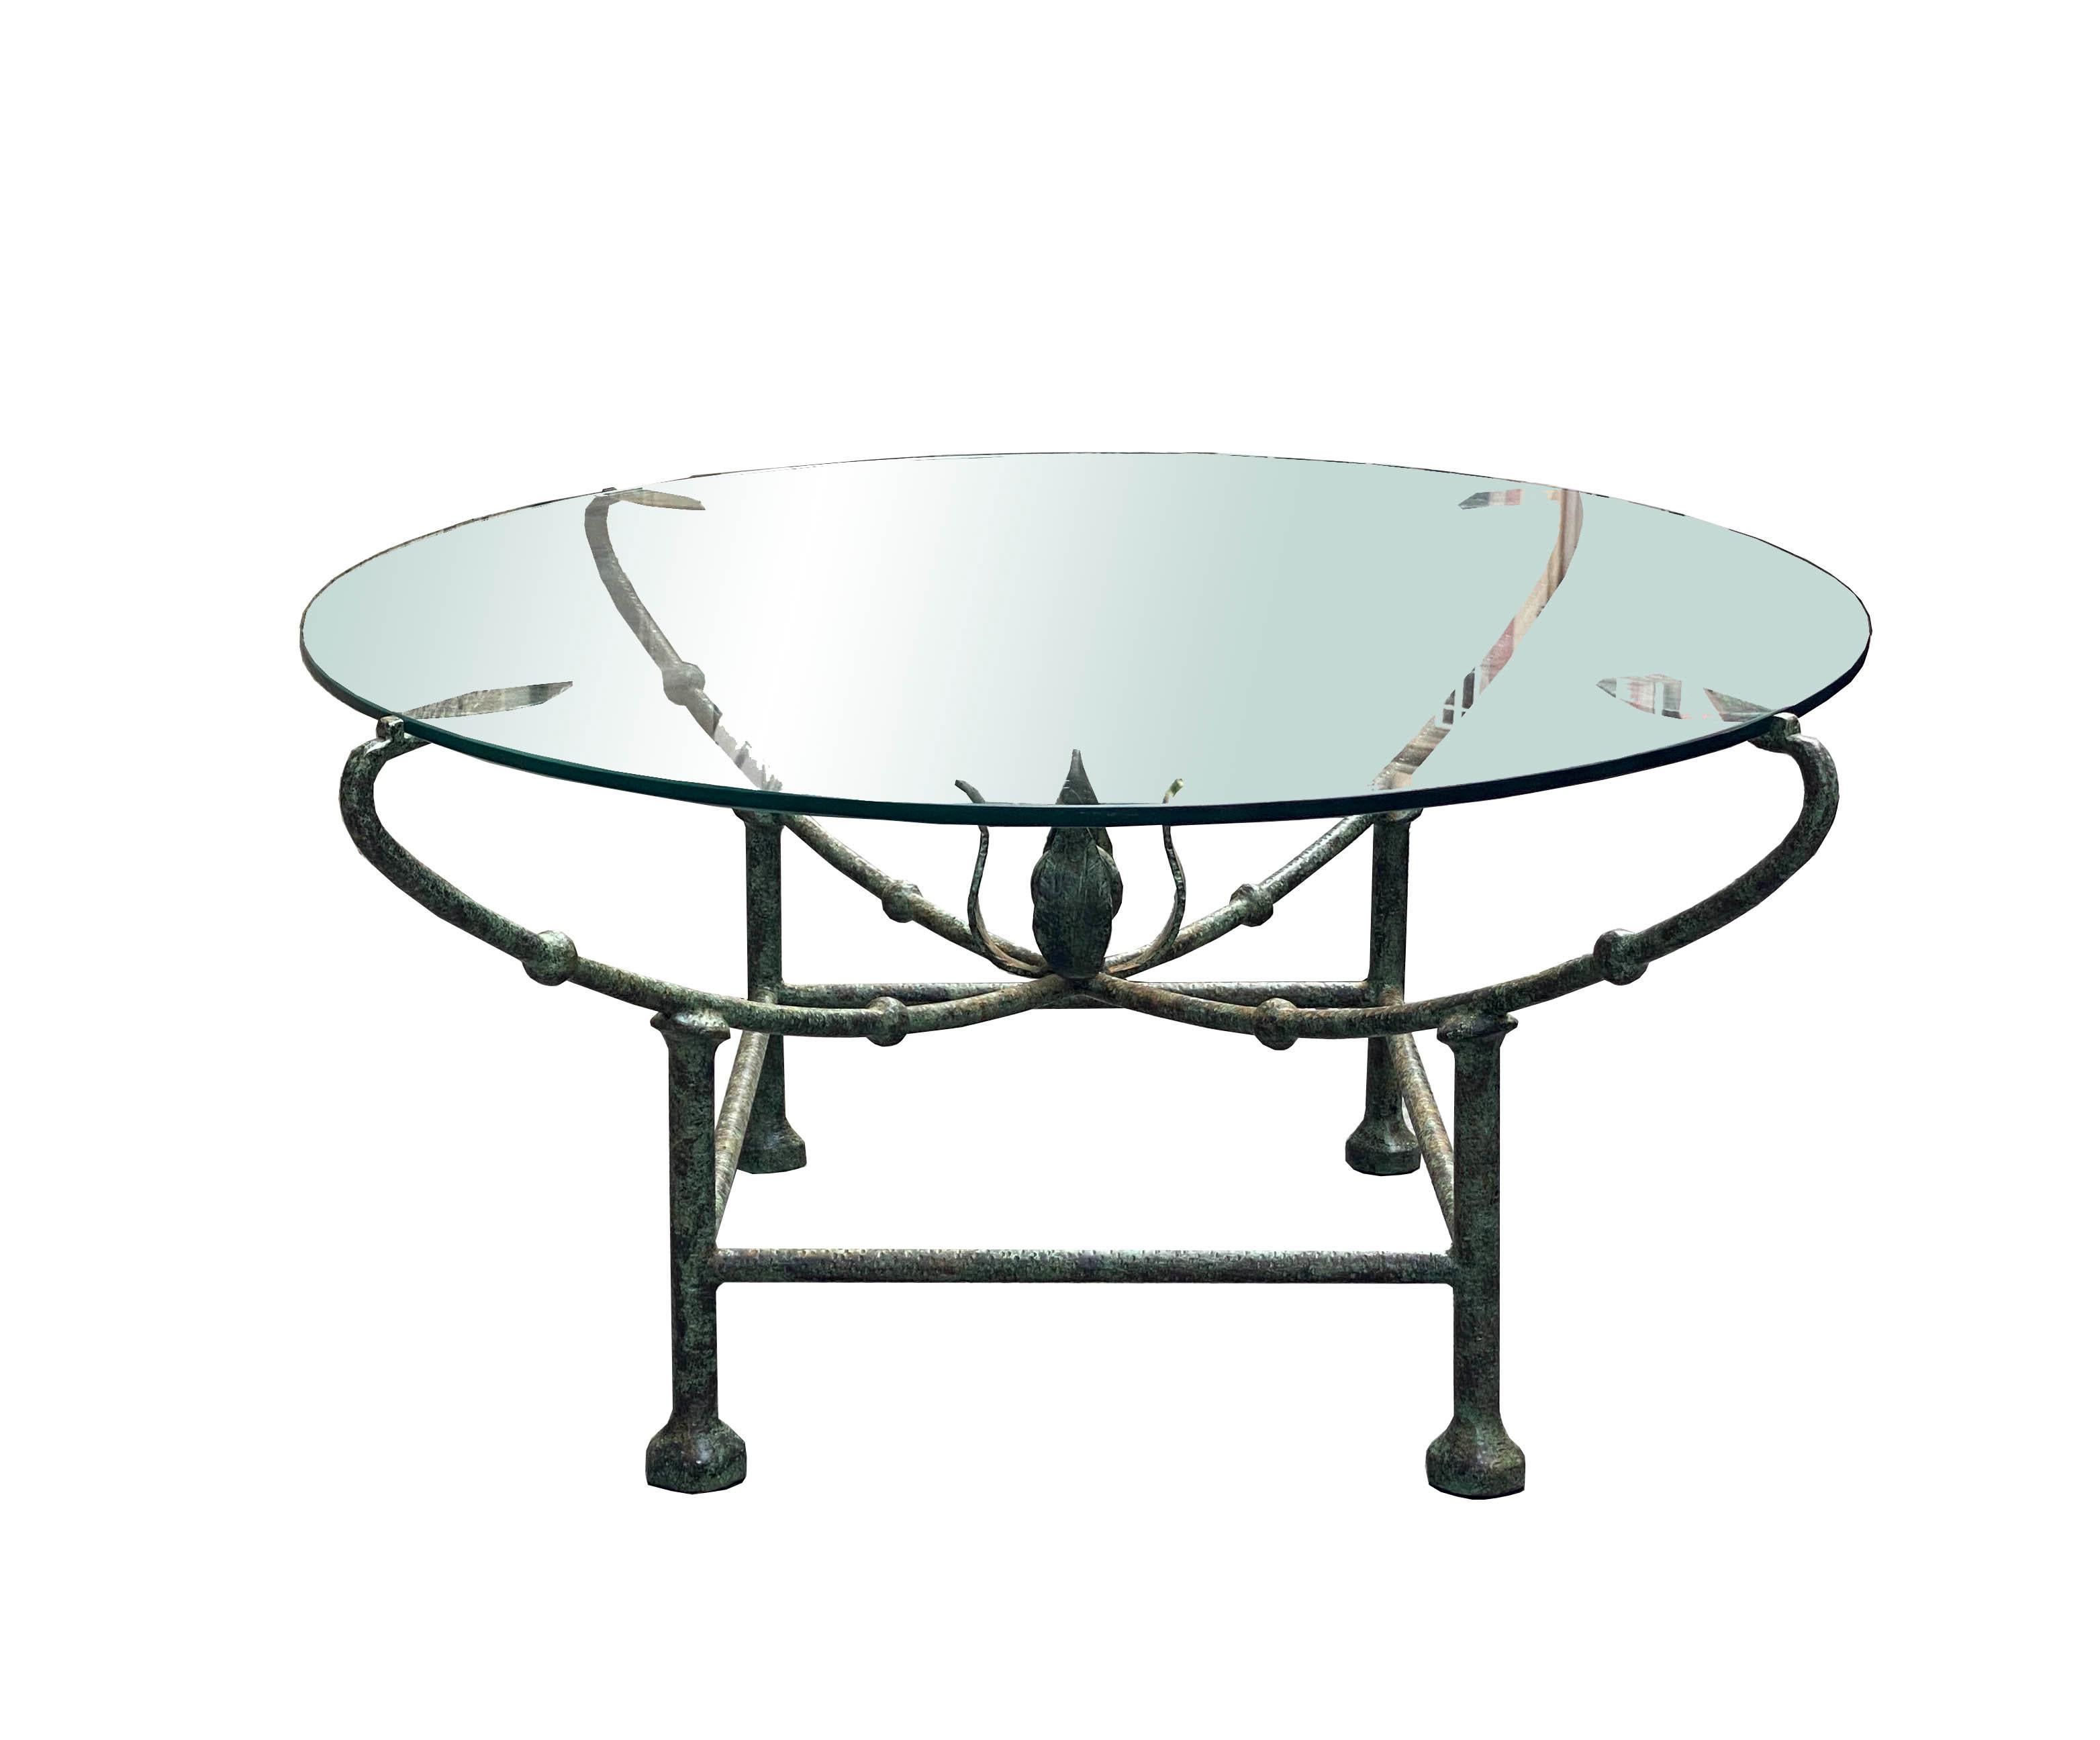 Mid-Century Modern Giacometti Style Oval Wrought Iron Coffee Table with Glass Top, Italy, 1970s For Sale